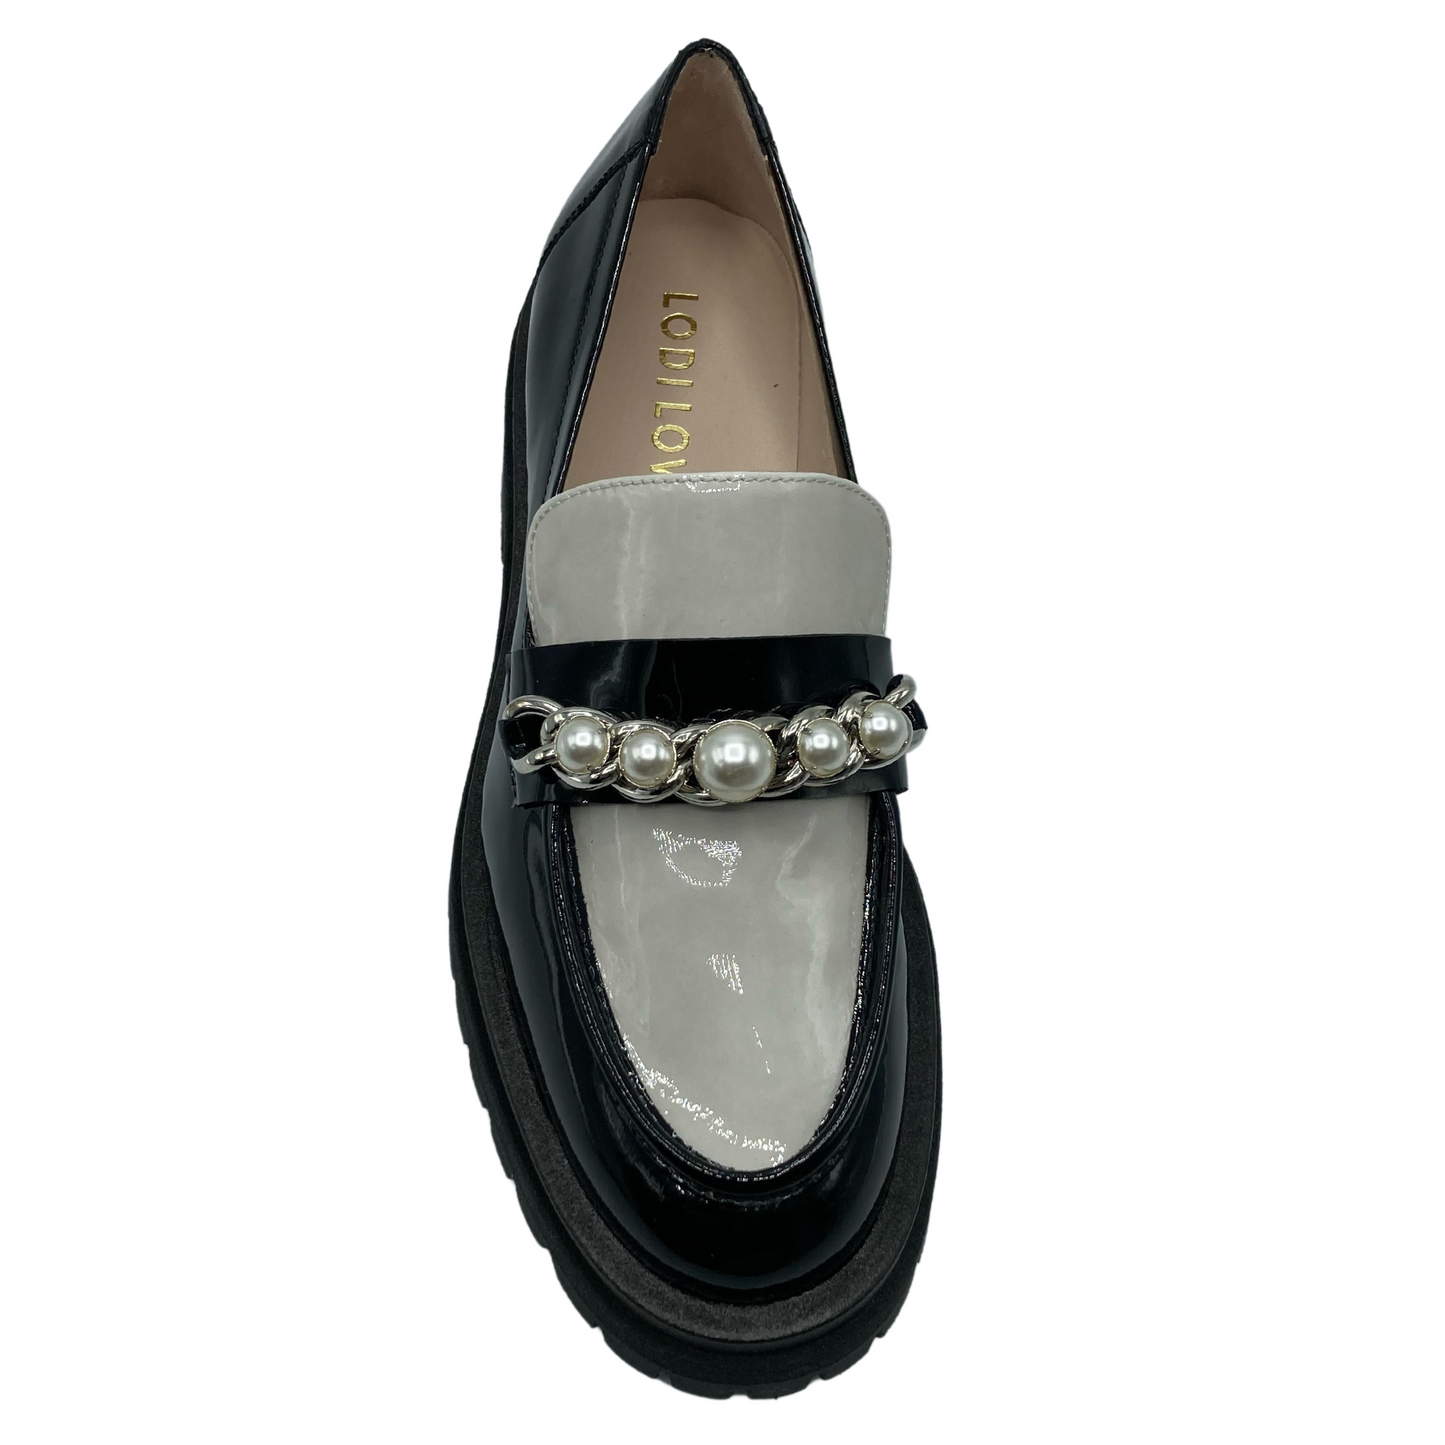 Top view of black and white patent leather loafer with pearl and chain detail on upper